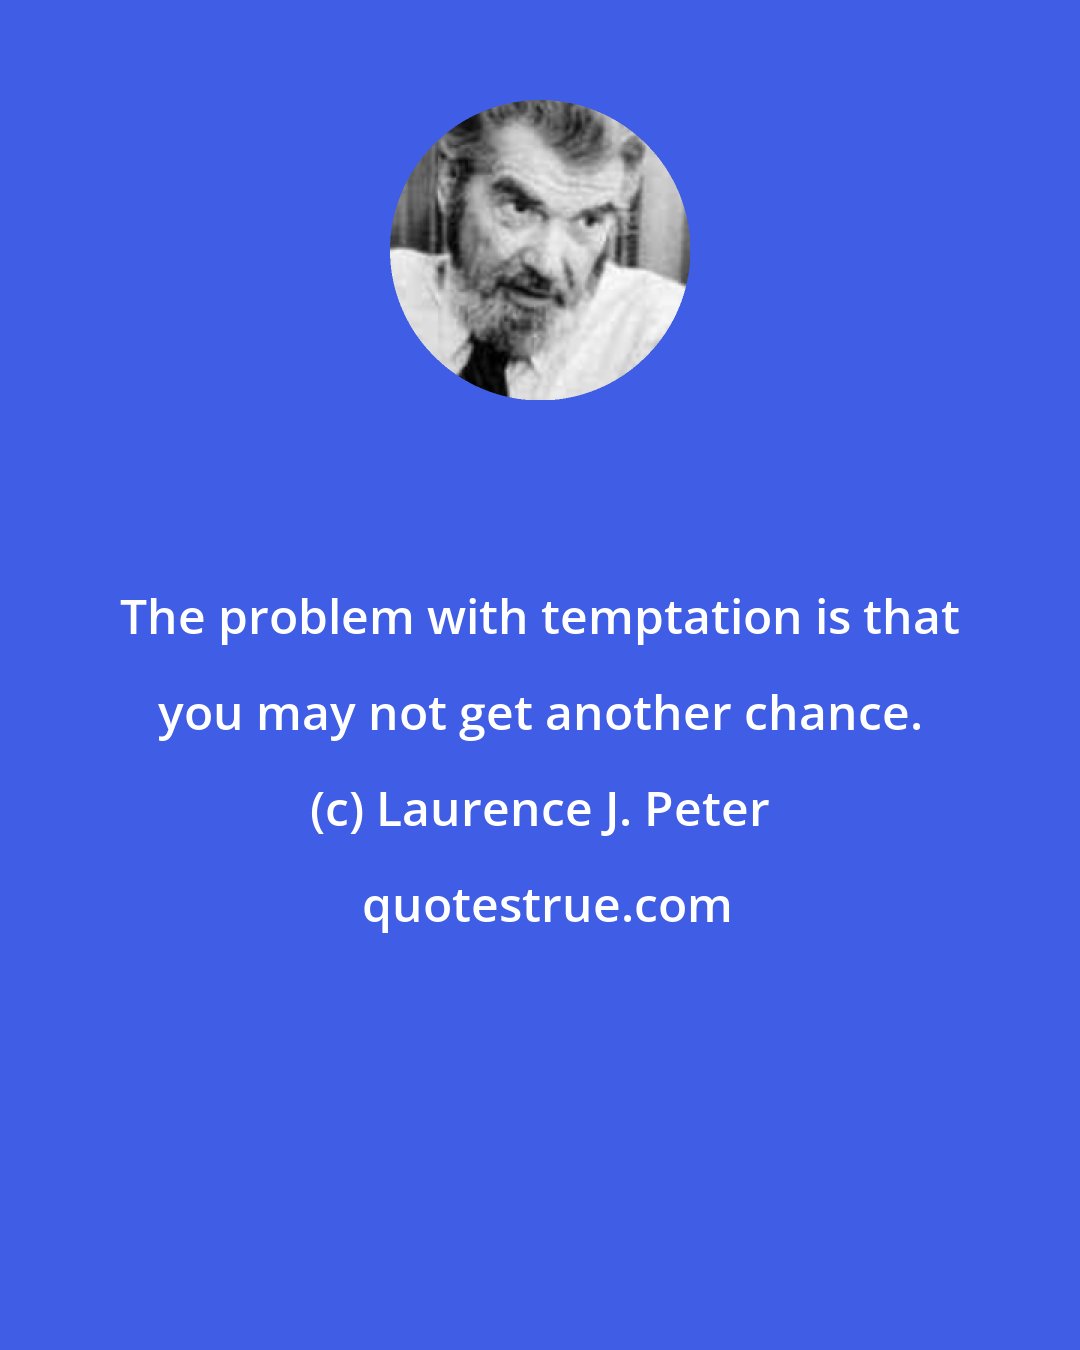 Laurence J. Peter: The problem with temptation is that you may not get another chance.